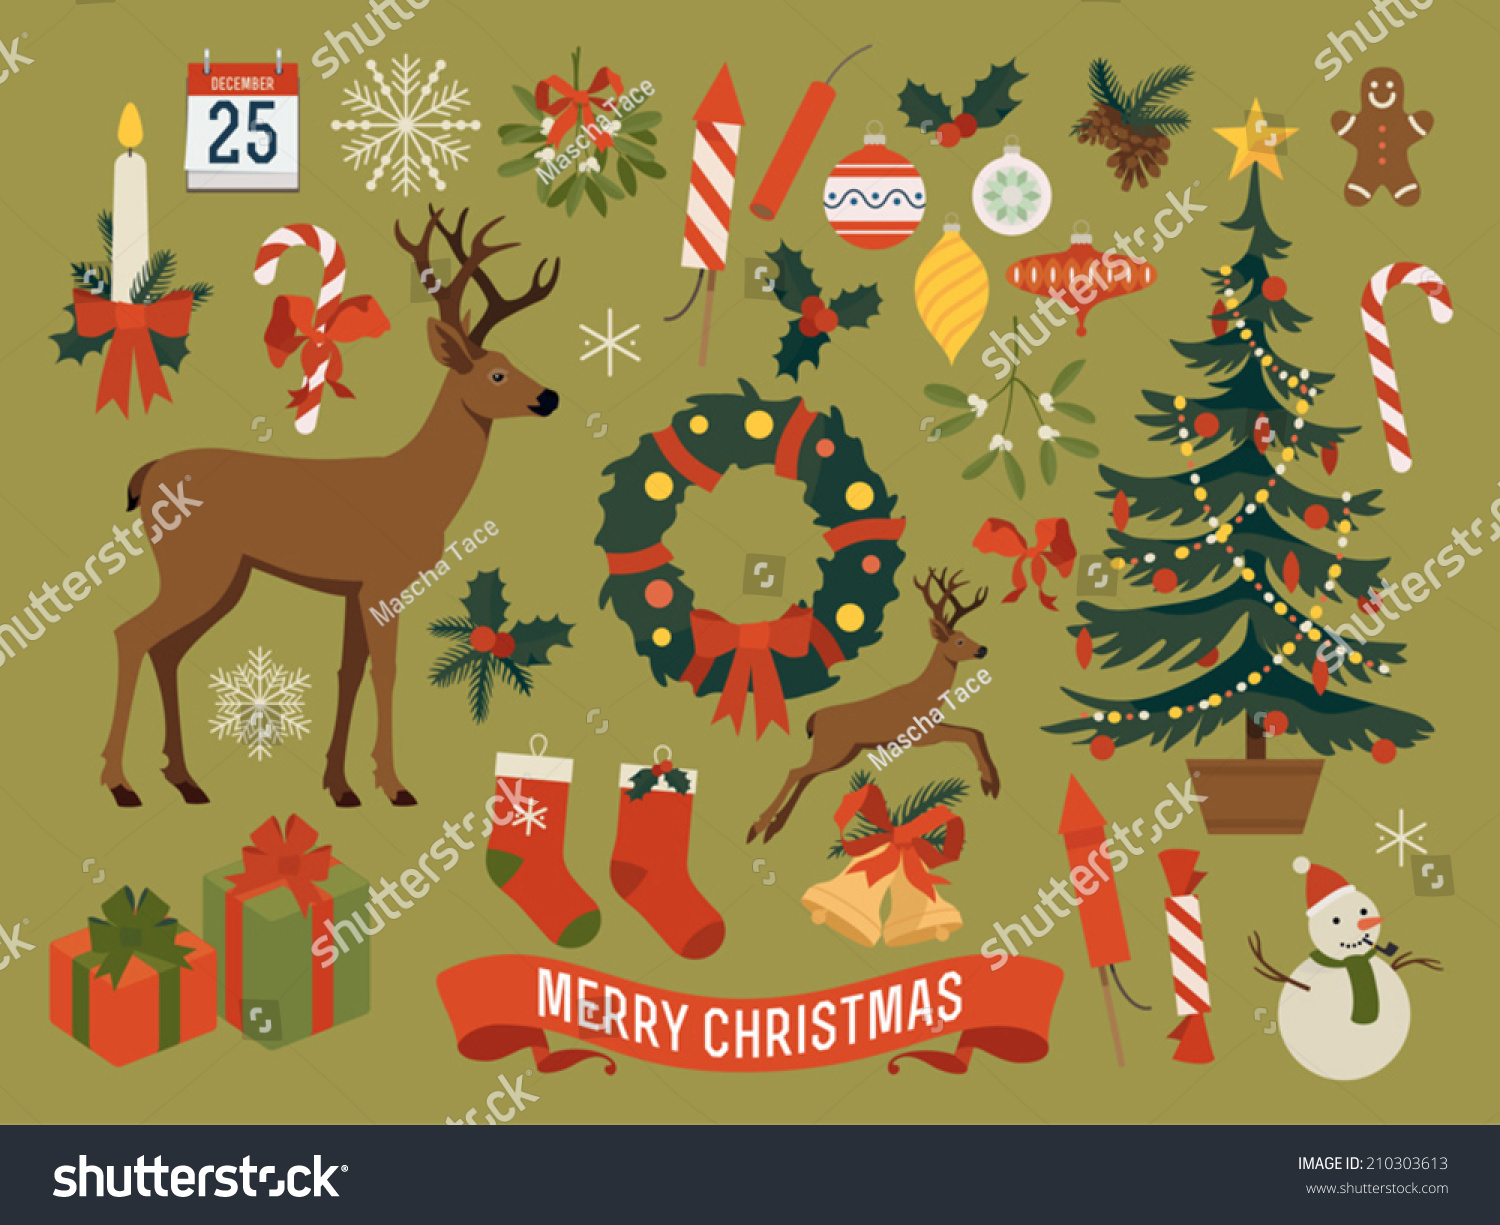 Vector Collection Christmas Items Elements Decorations 